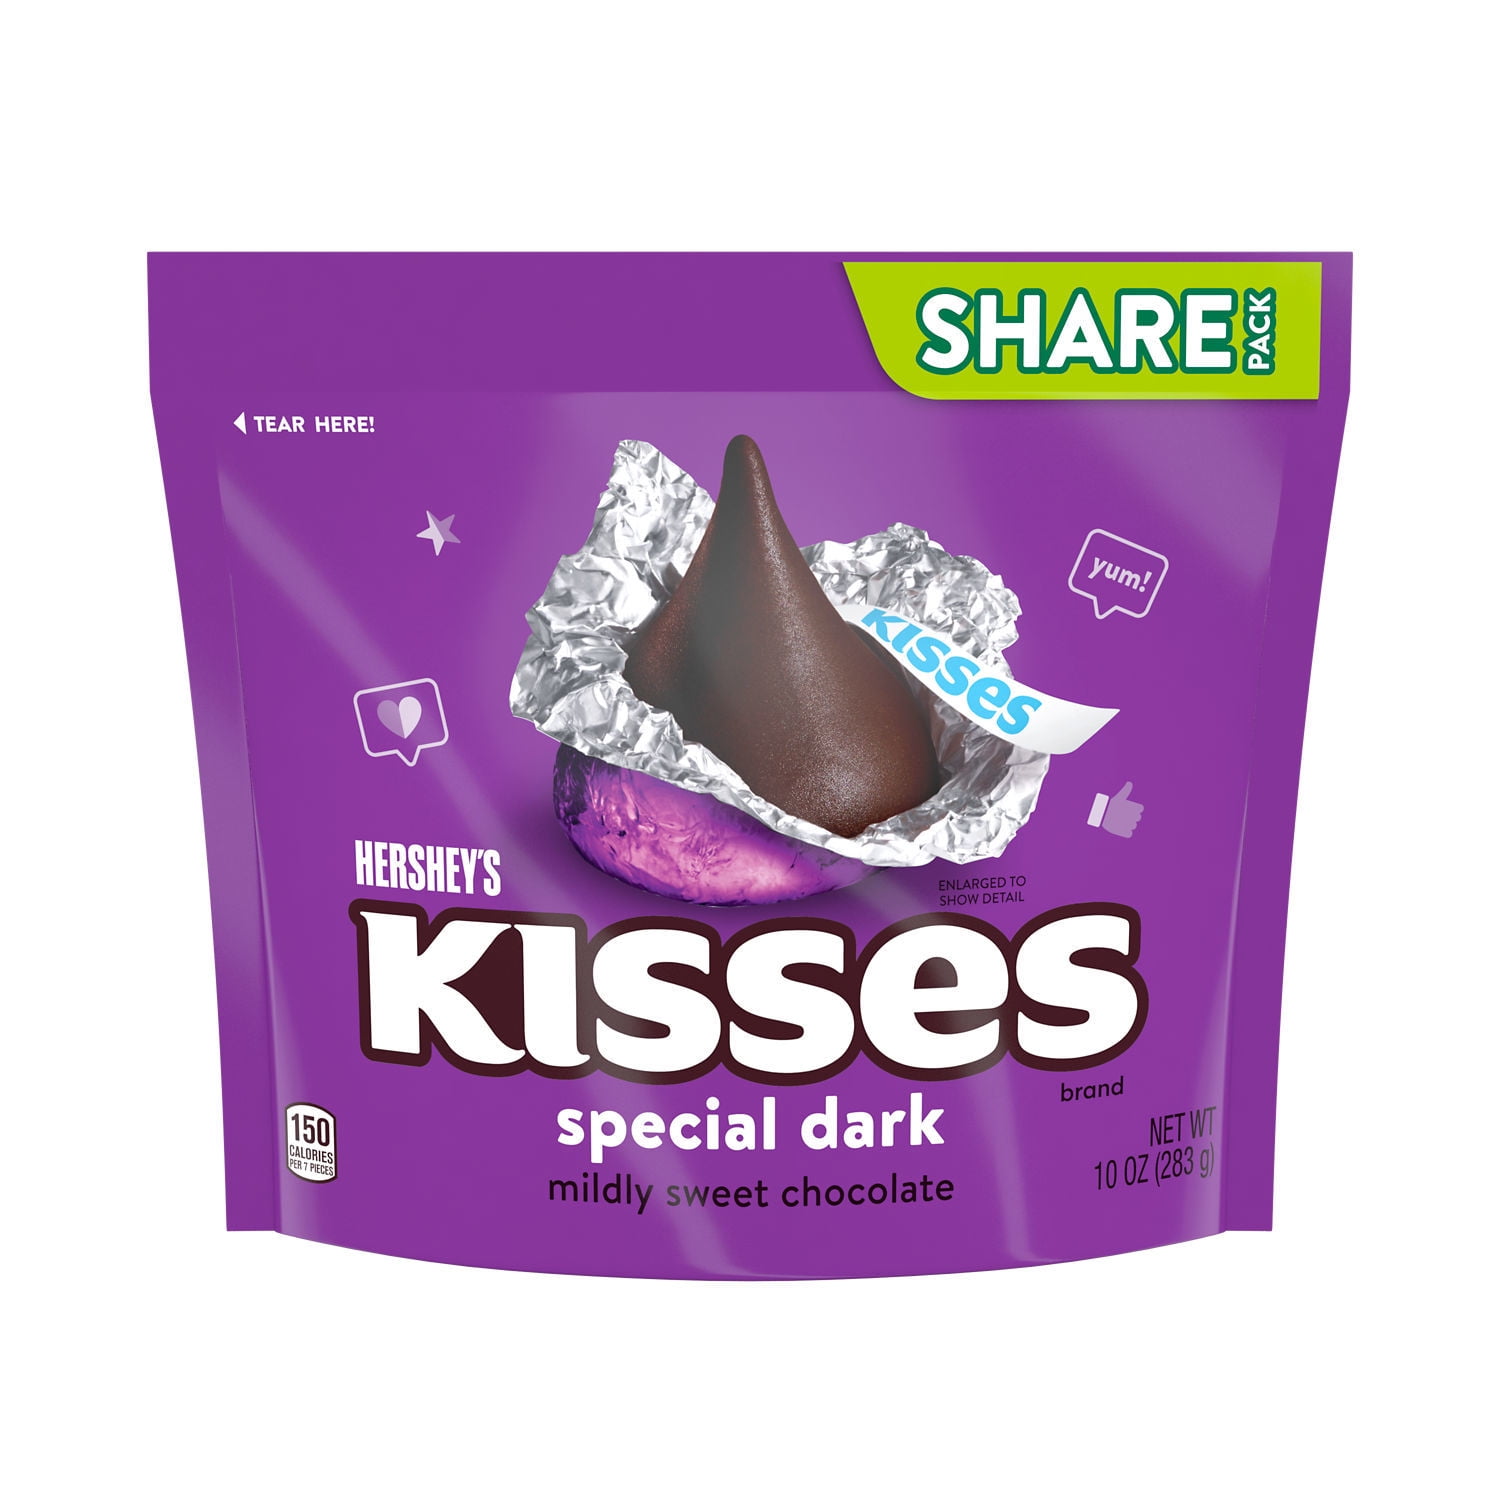 Hershey's, Kisses Special Dark Mildly Sweet Chocolate Candy, Individually Wrapped, 10 oz, Share Pack